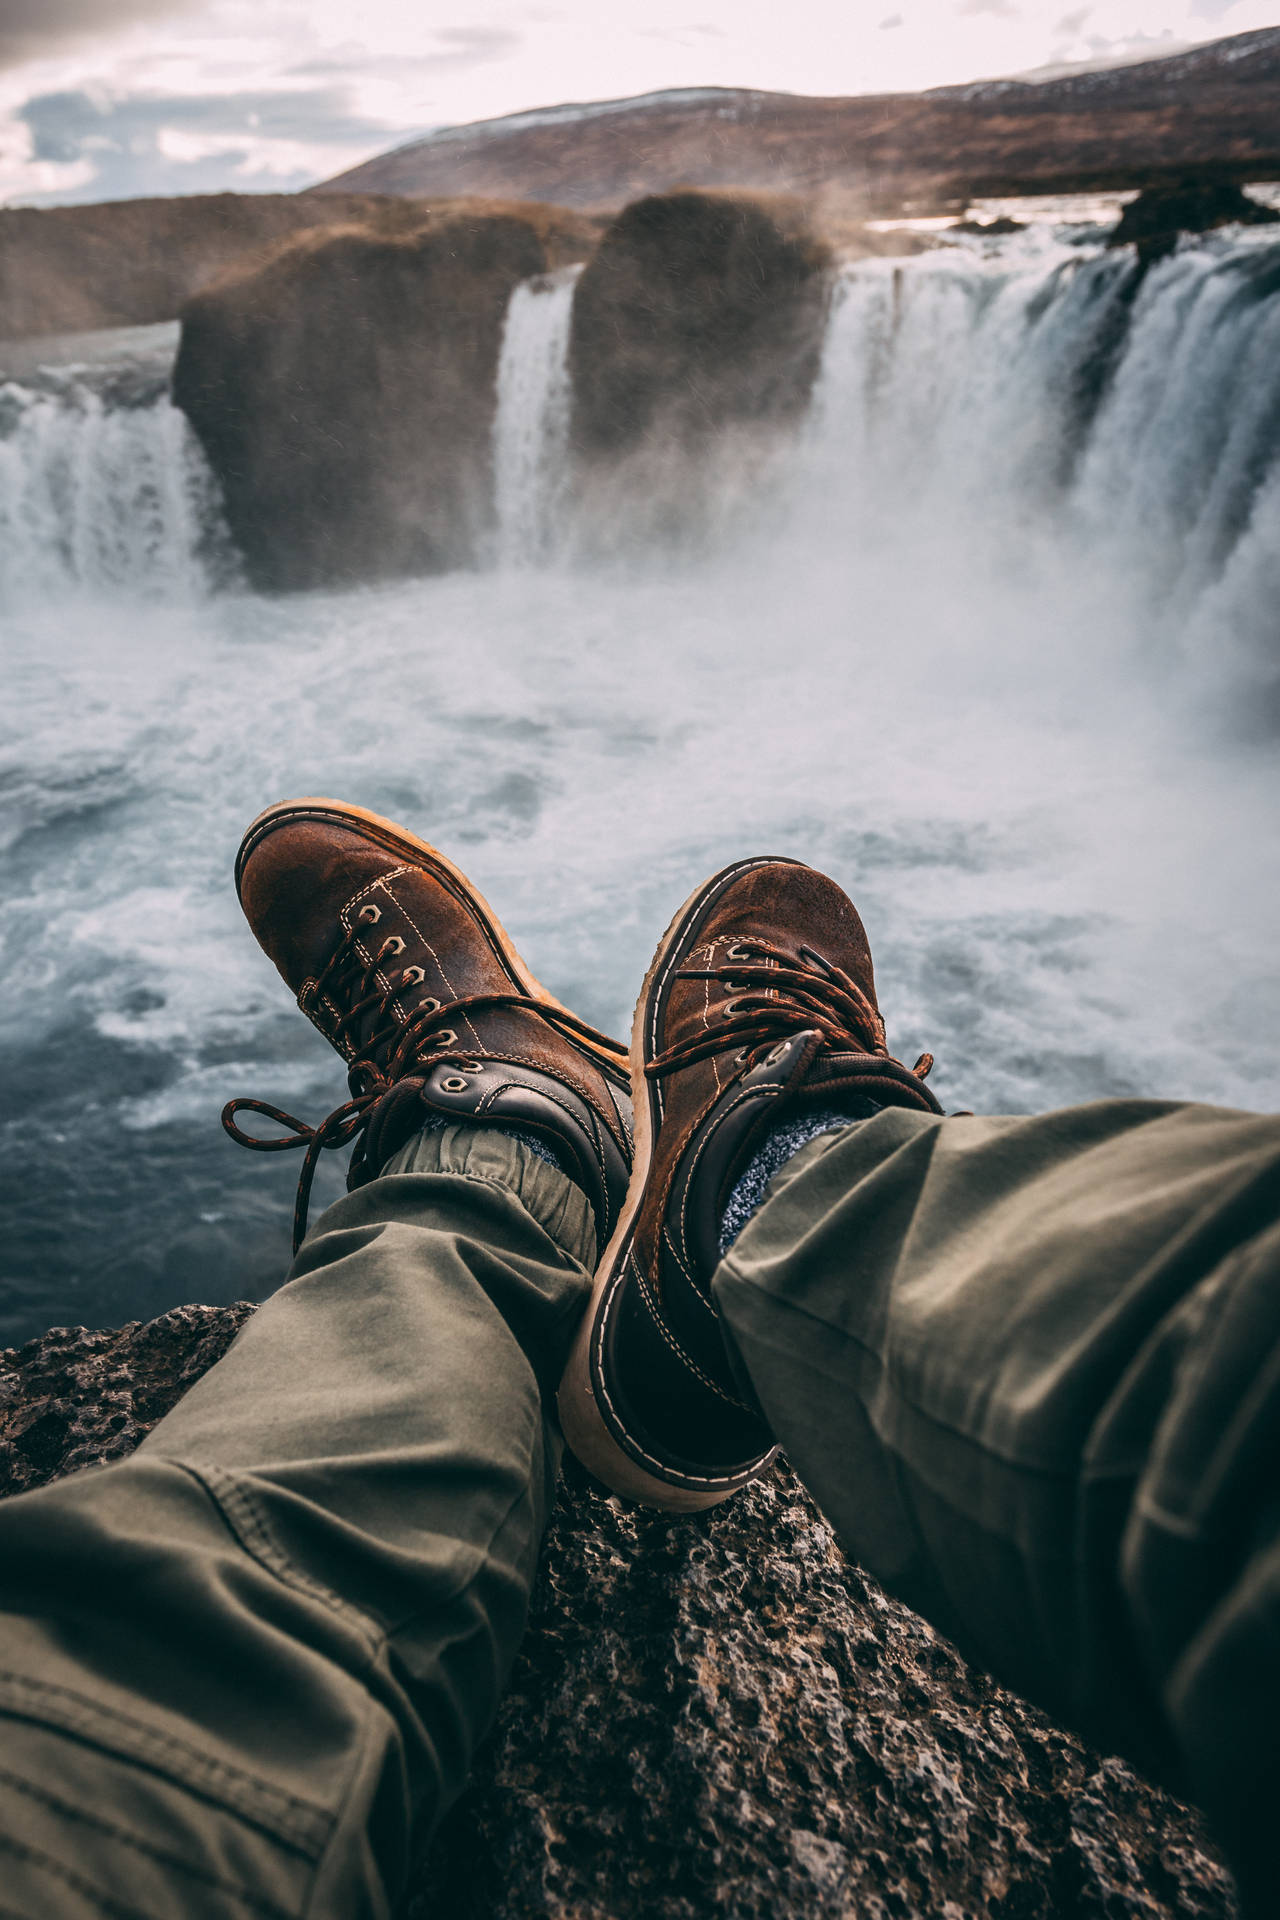 Shoes By A Waterfall